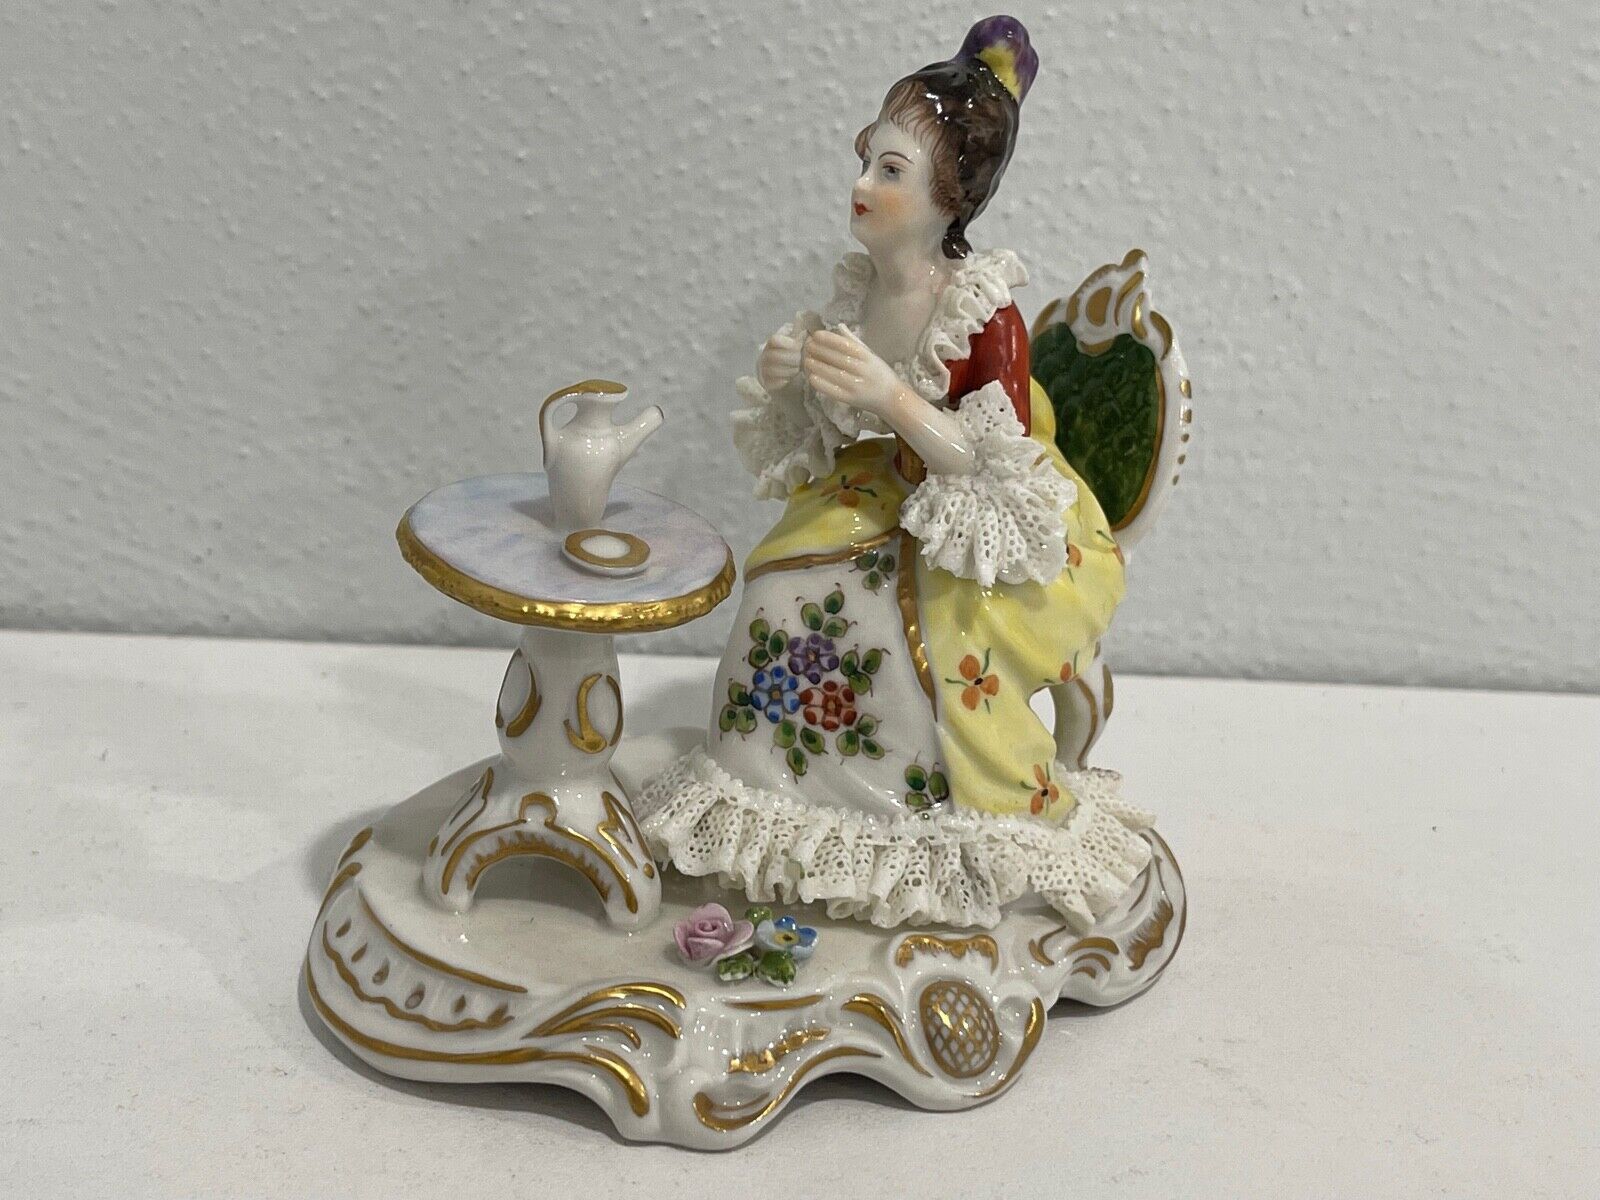 Vintage German Volkstedt Porcelain Lace Figurine Woman Drinking Cup of Tea